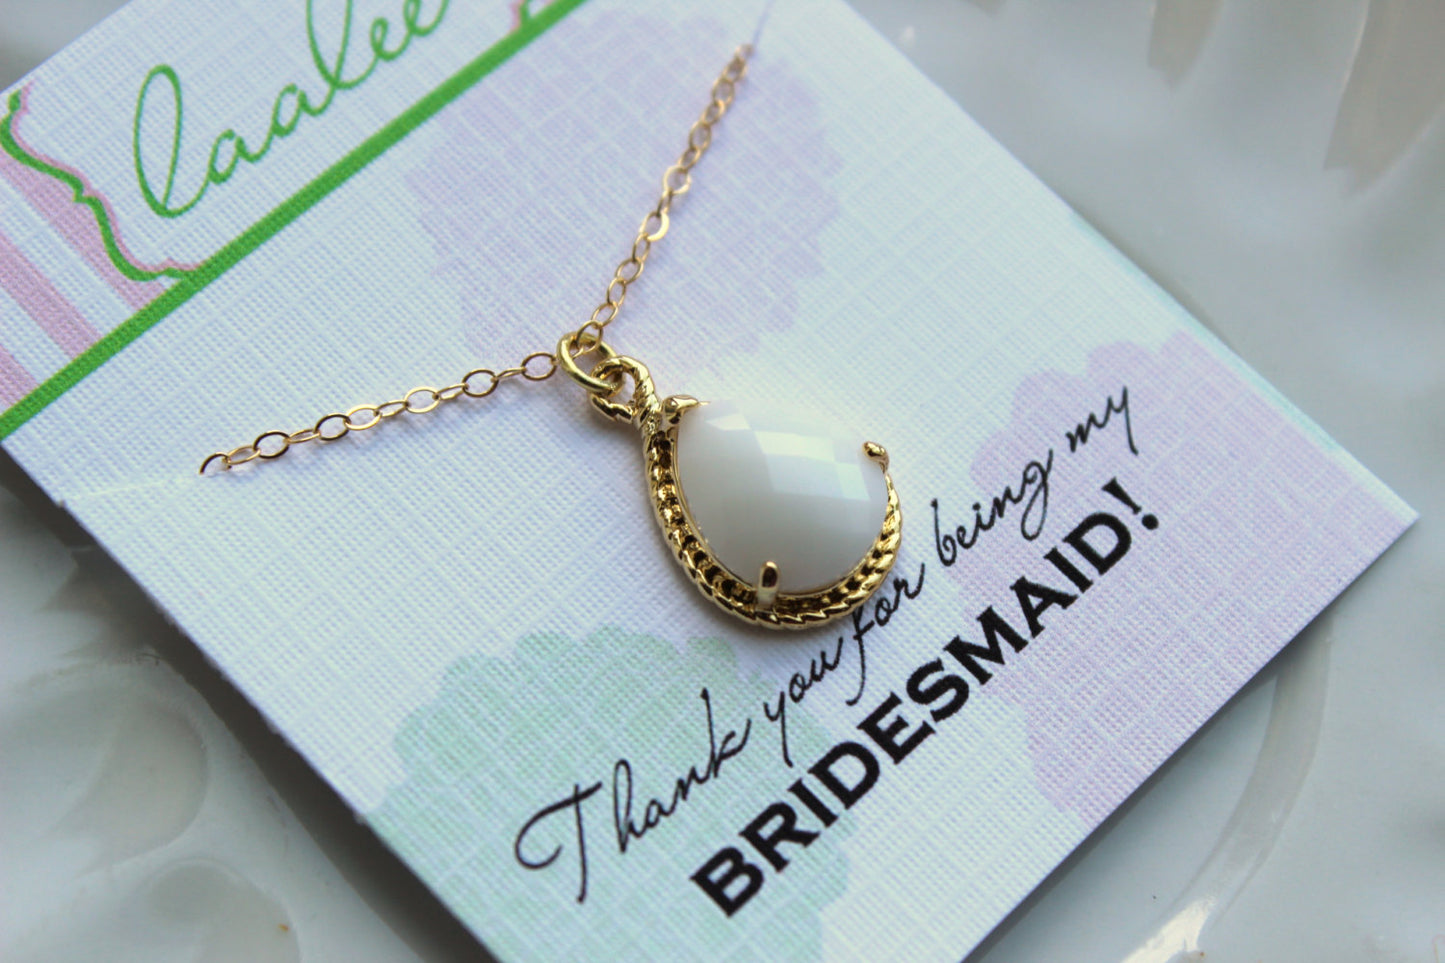 Gold White Opal Necklace - Cream Milk White Wedding Necklace Jewelry Bridesmaid Gift Jewelry - White Opal Bridal Jewelry - Gift Under 30